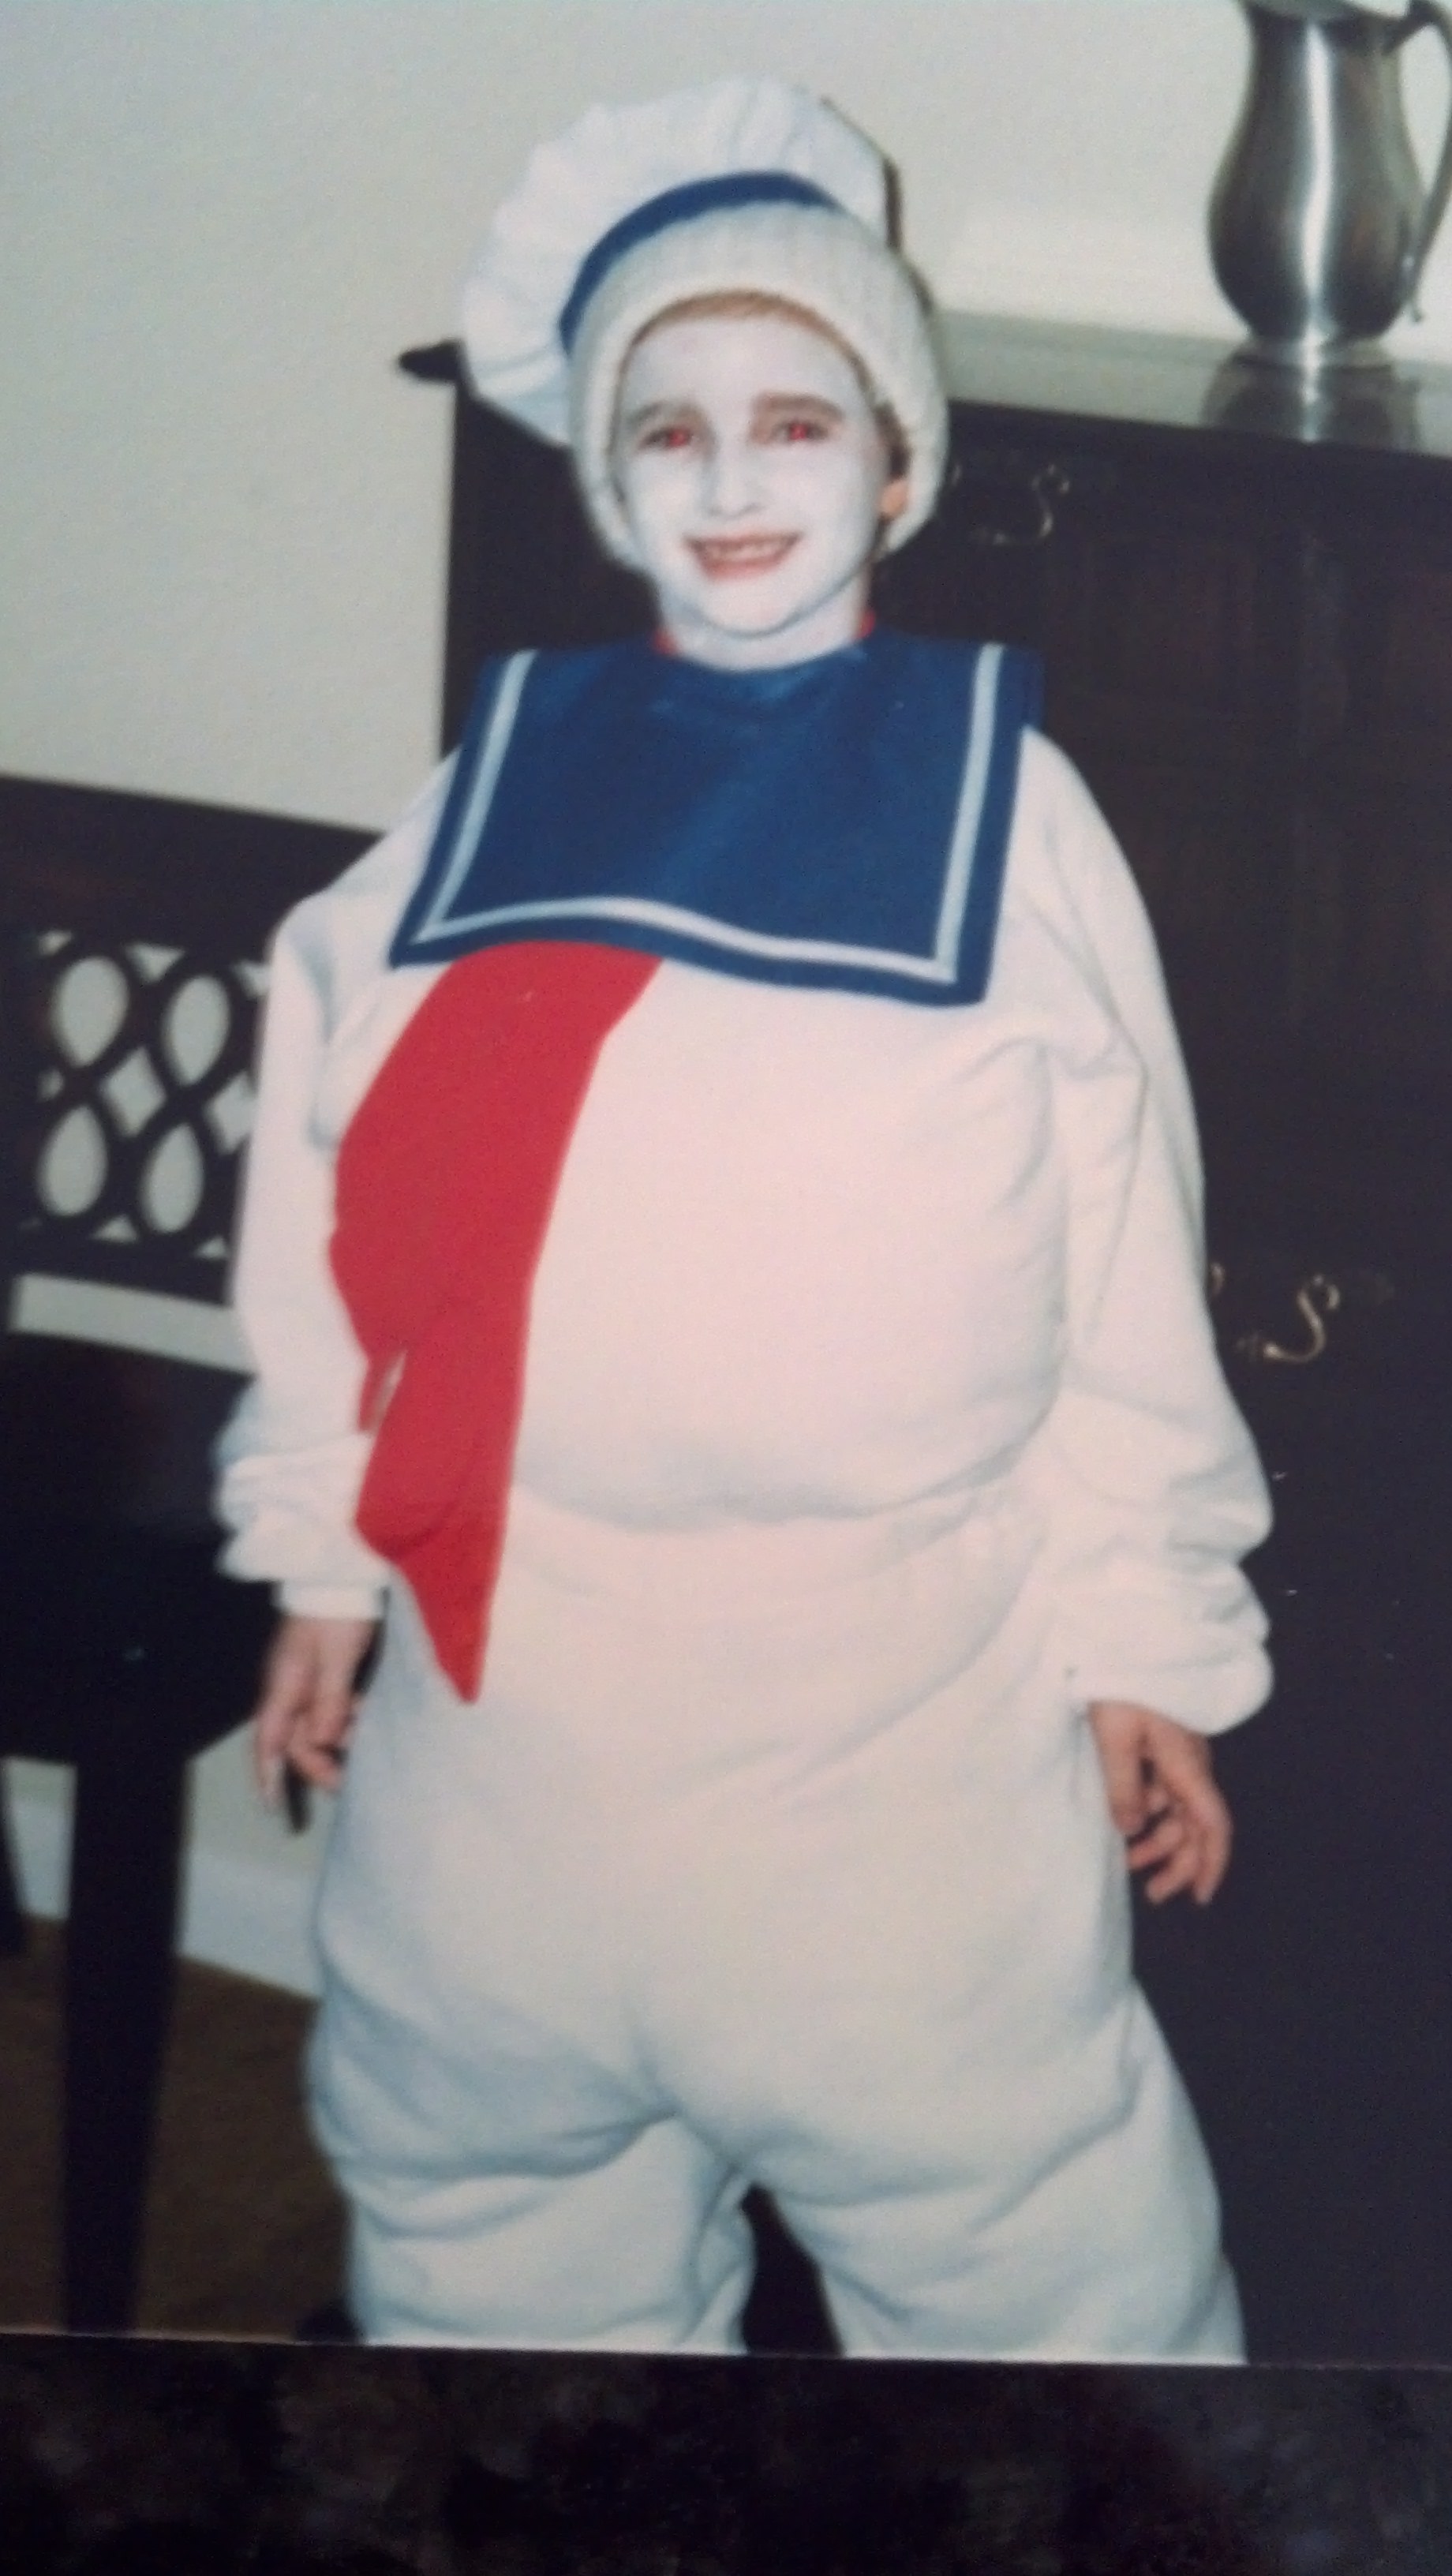 The author as the Puft Marshmallow Man.